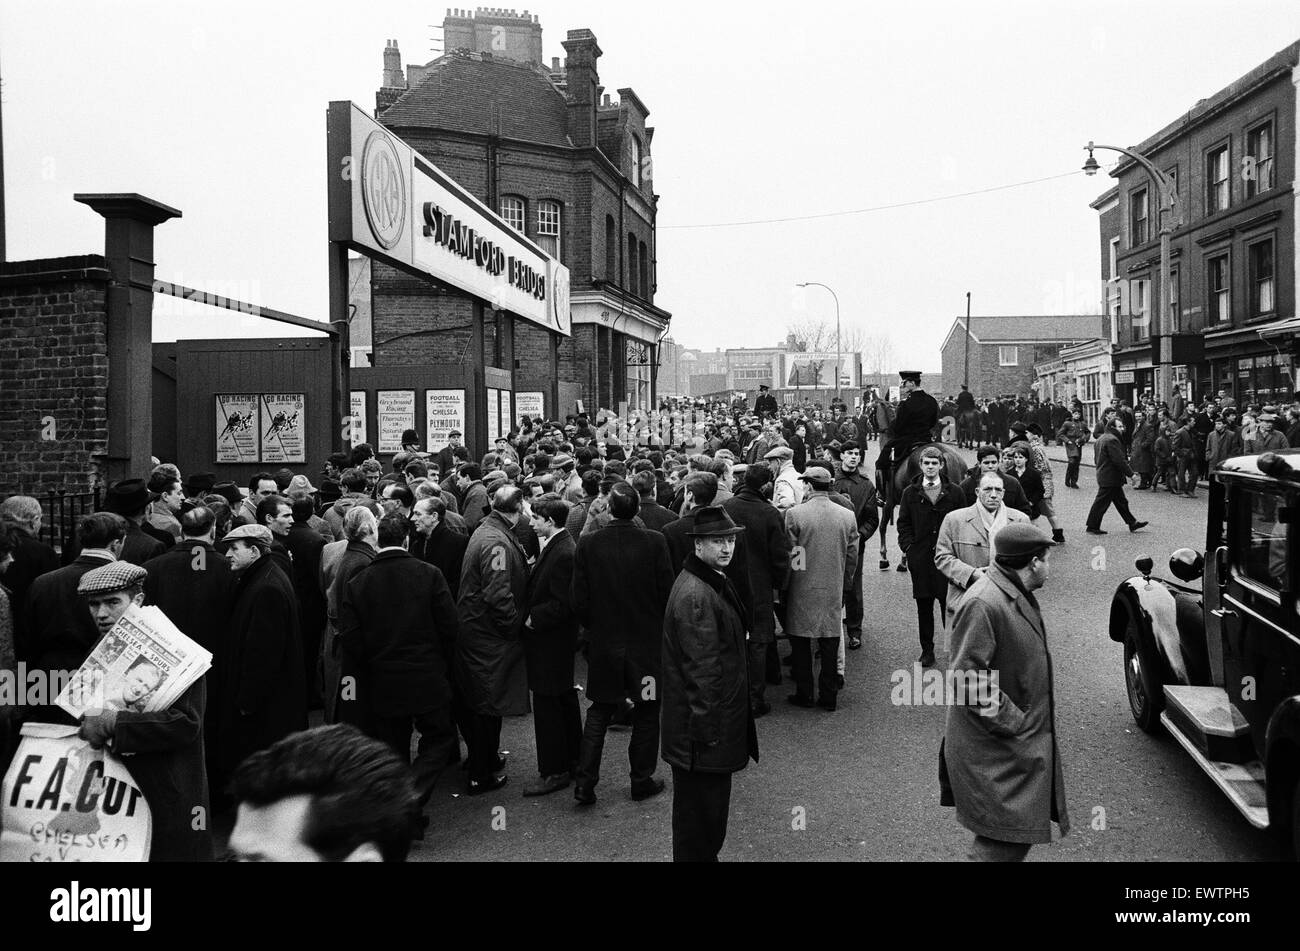 Scenes outside Stamford Bridge stadium half an hour before a match between Chelsea v Tottenham Hotspur, FA Cup 5th round, London. 20th February 1965. Stock Photo